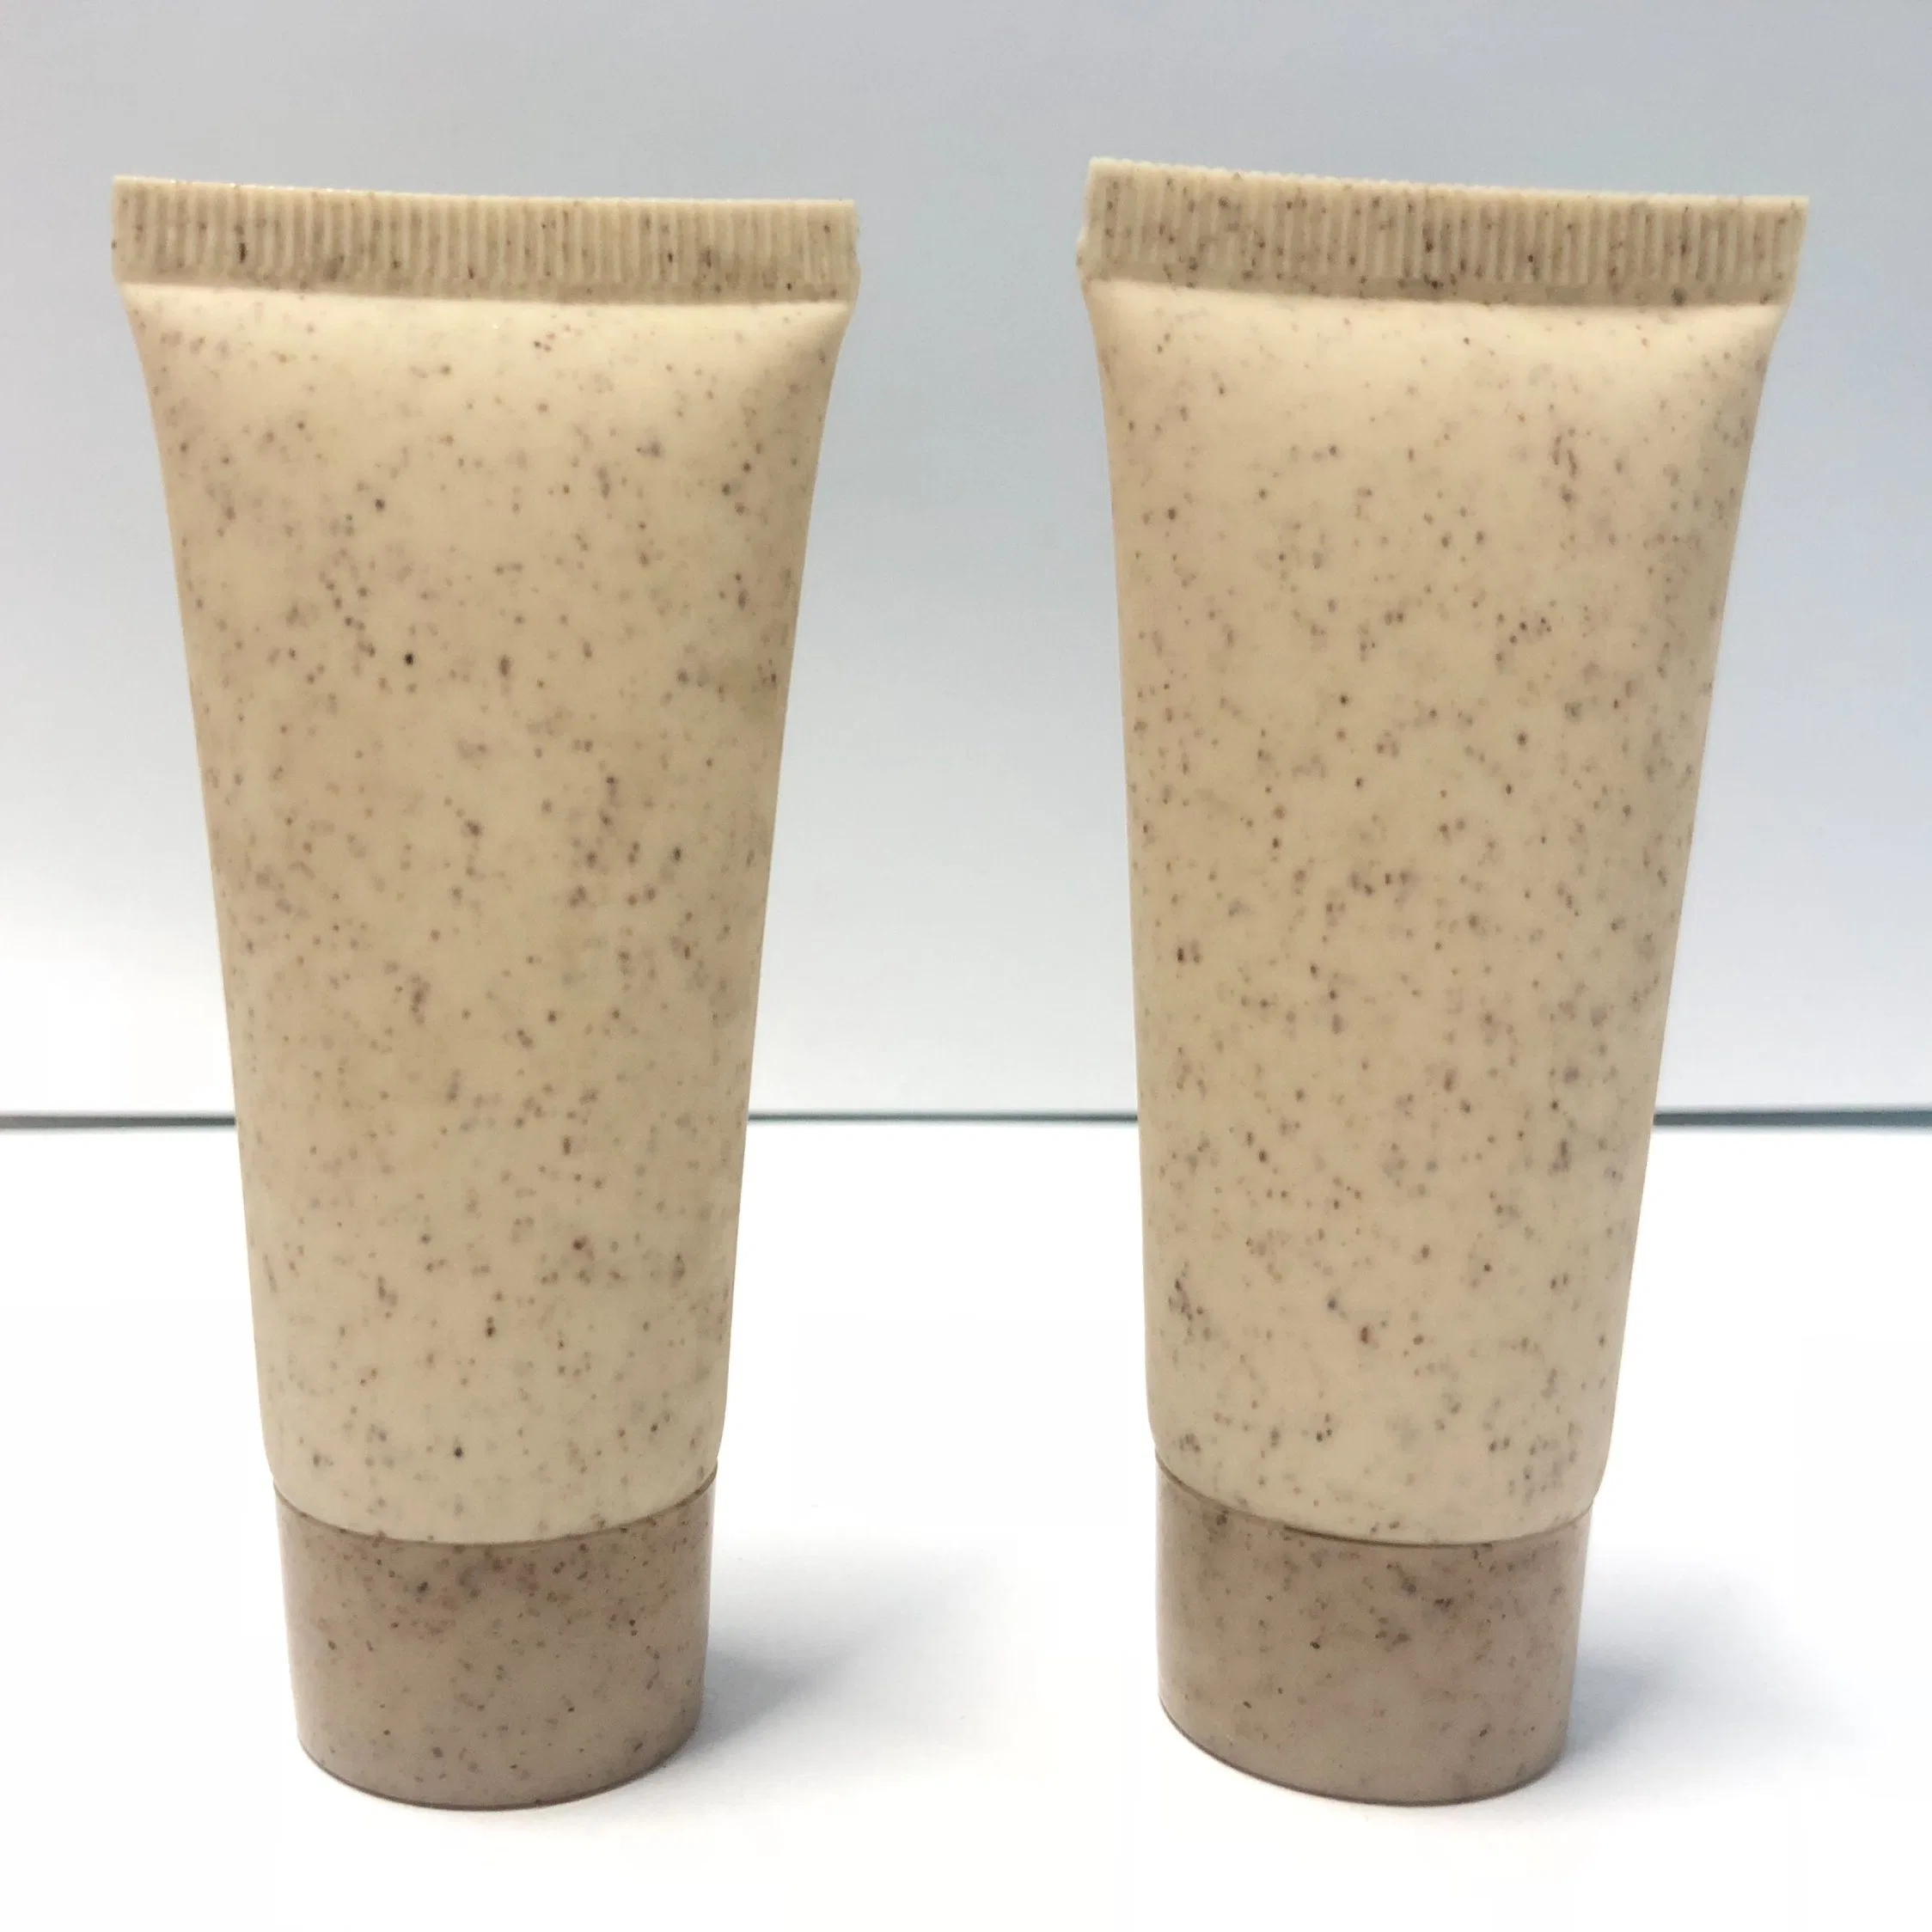 Eco Friendly Biodegradable Material Wheat Straw Shampoo Squeeze Tubes Packaging for Hotel Amenities Plastic